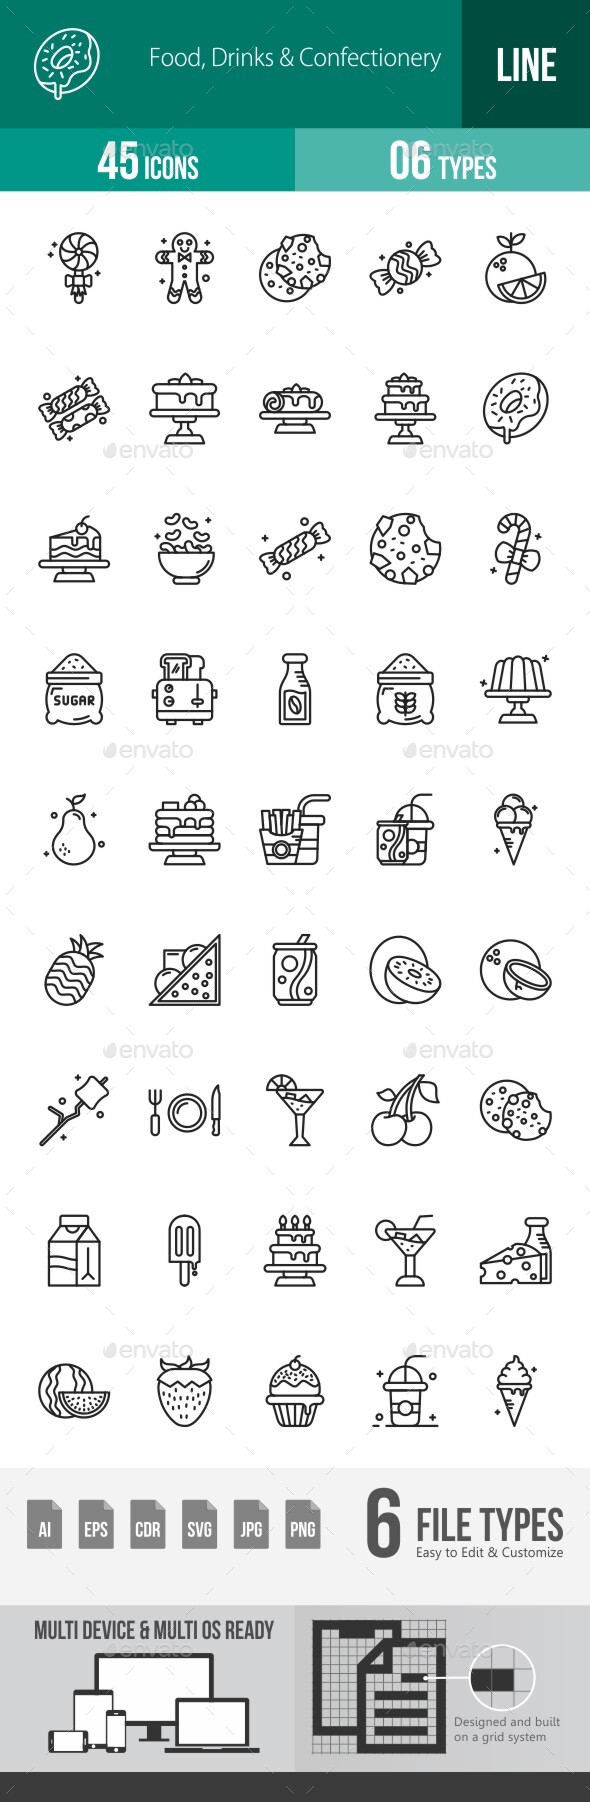 [DOWNLOAD]Food, Drinks & Confectionery Line Icons